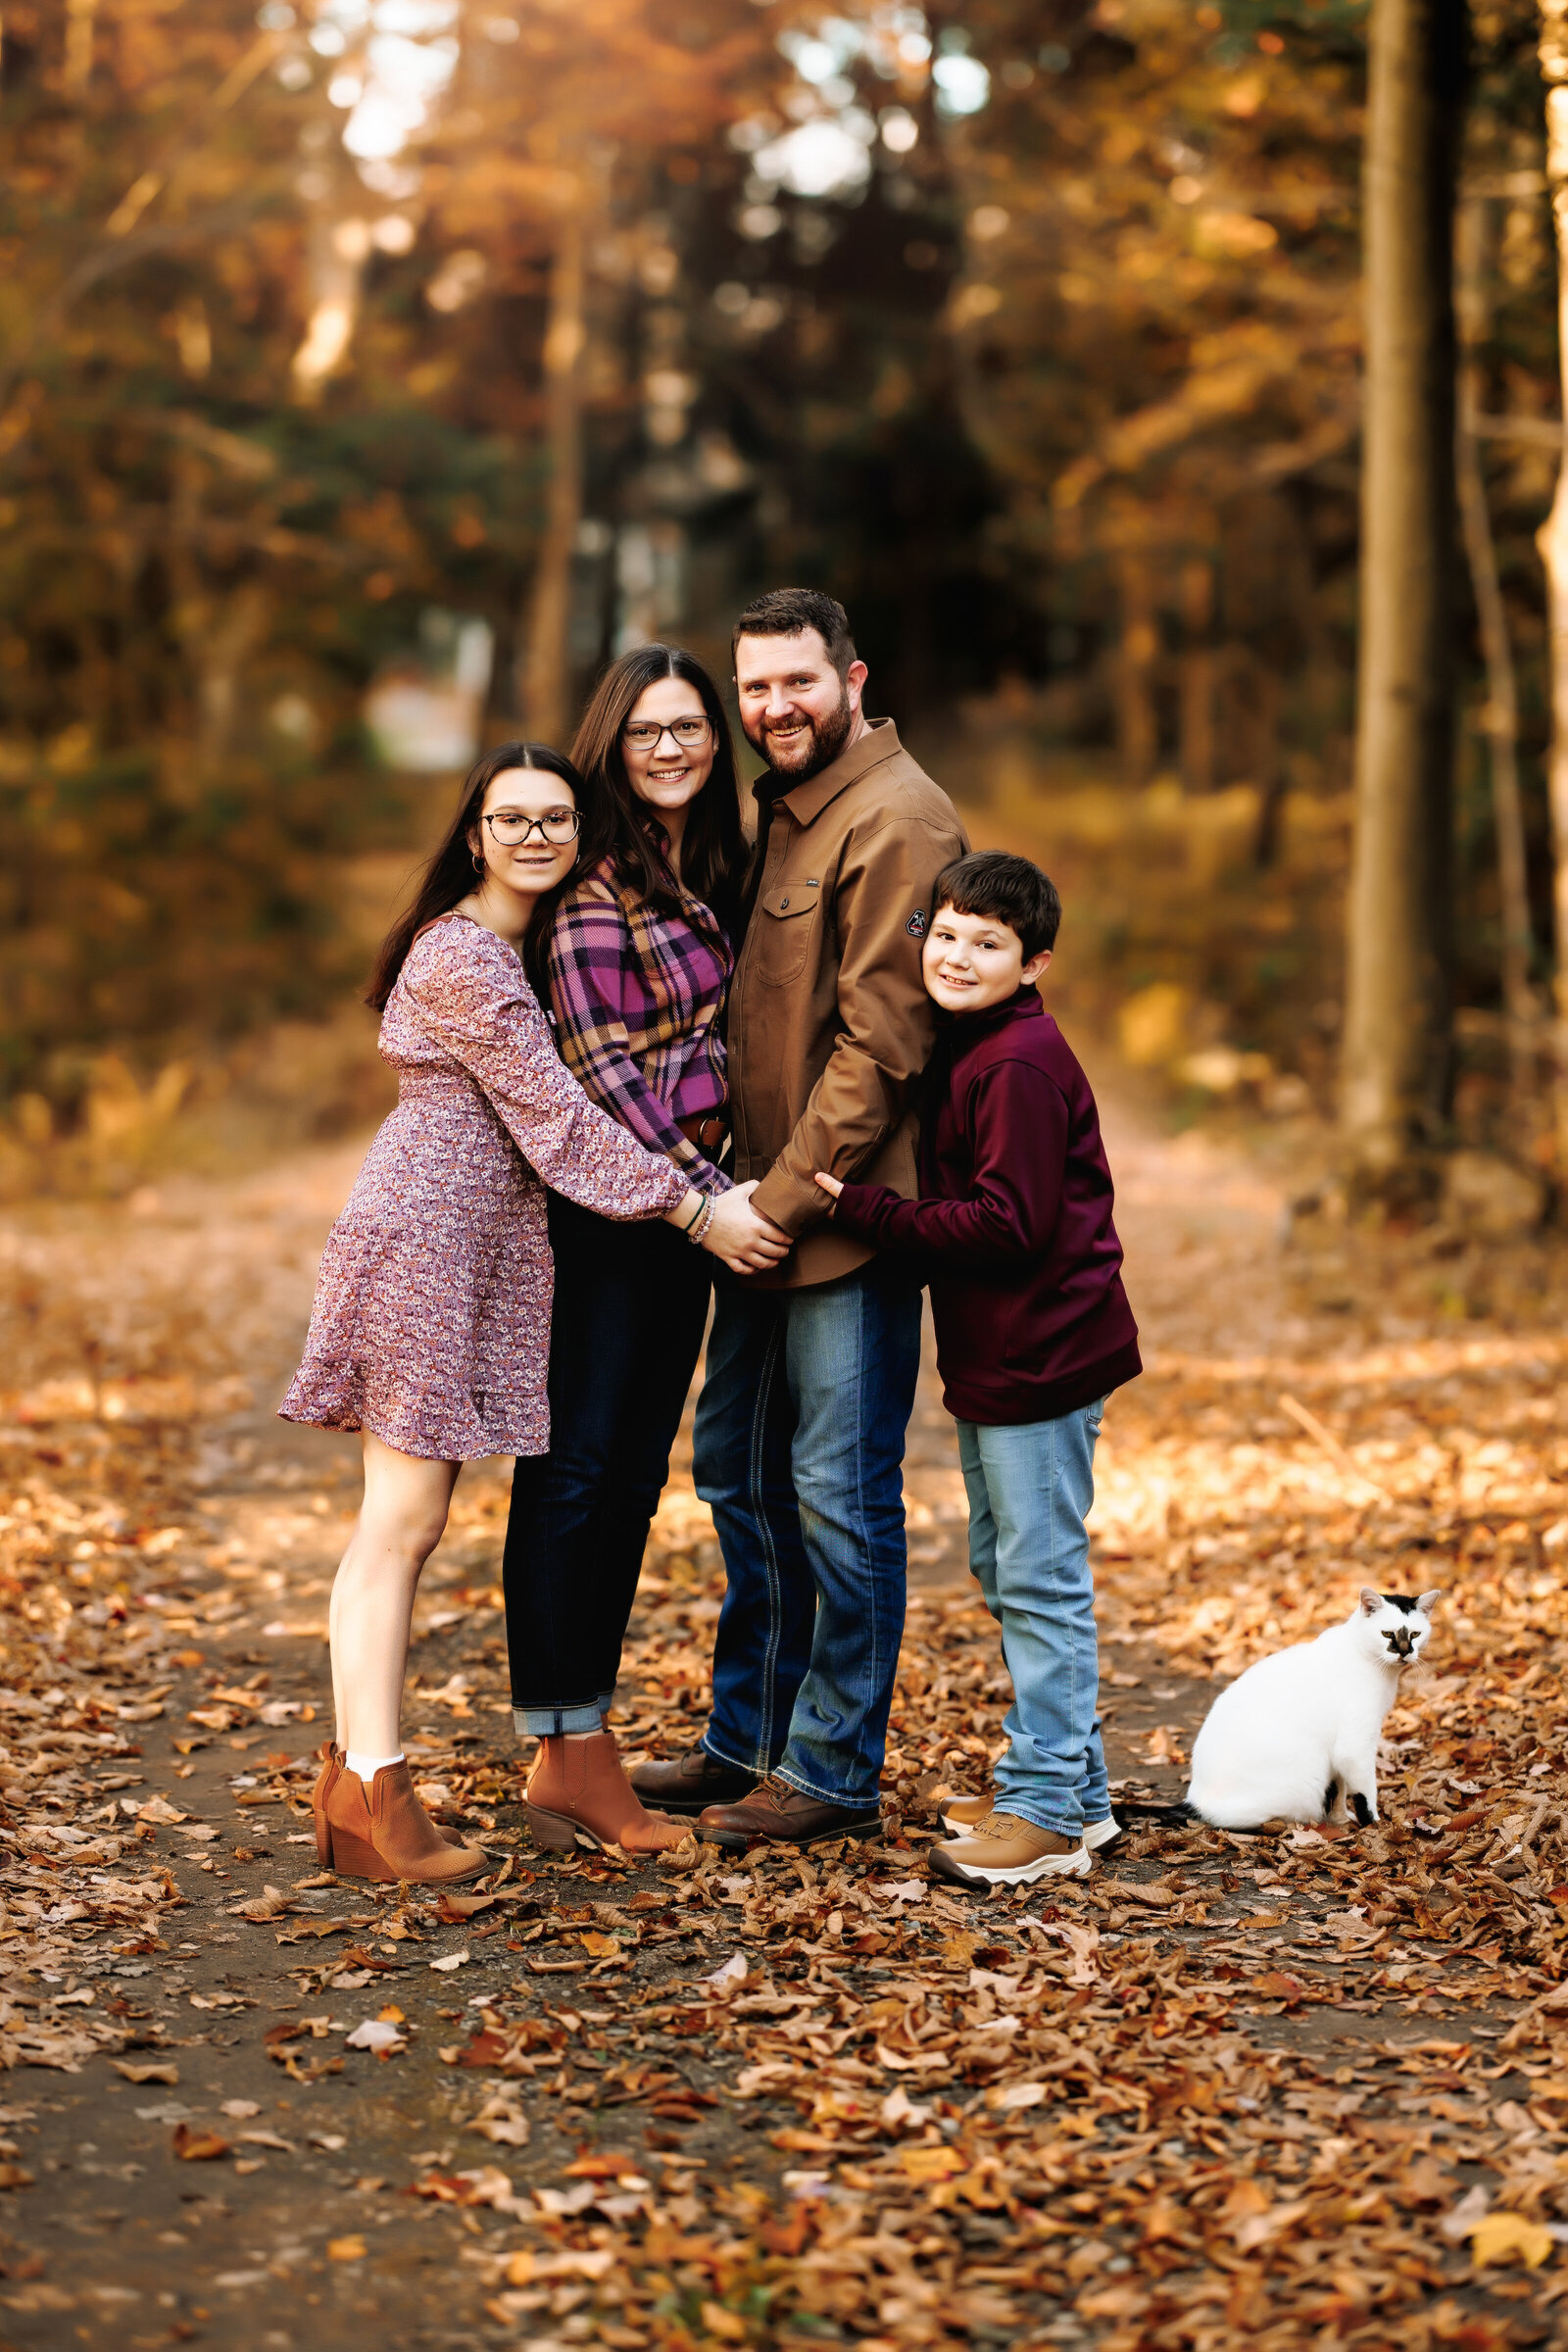 Family of 5 lean together for a photo on a path lined with beautiful fall foliage